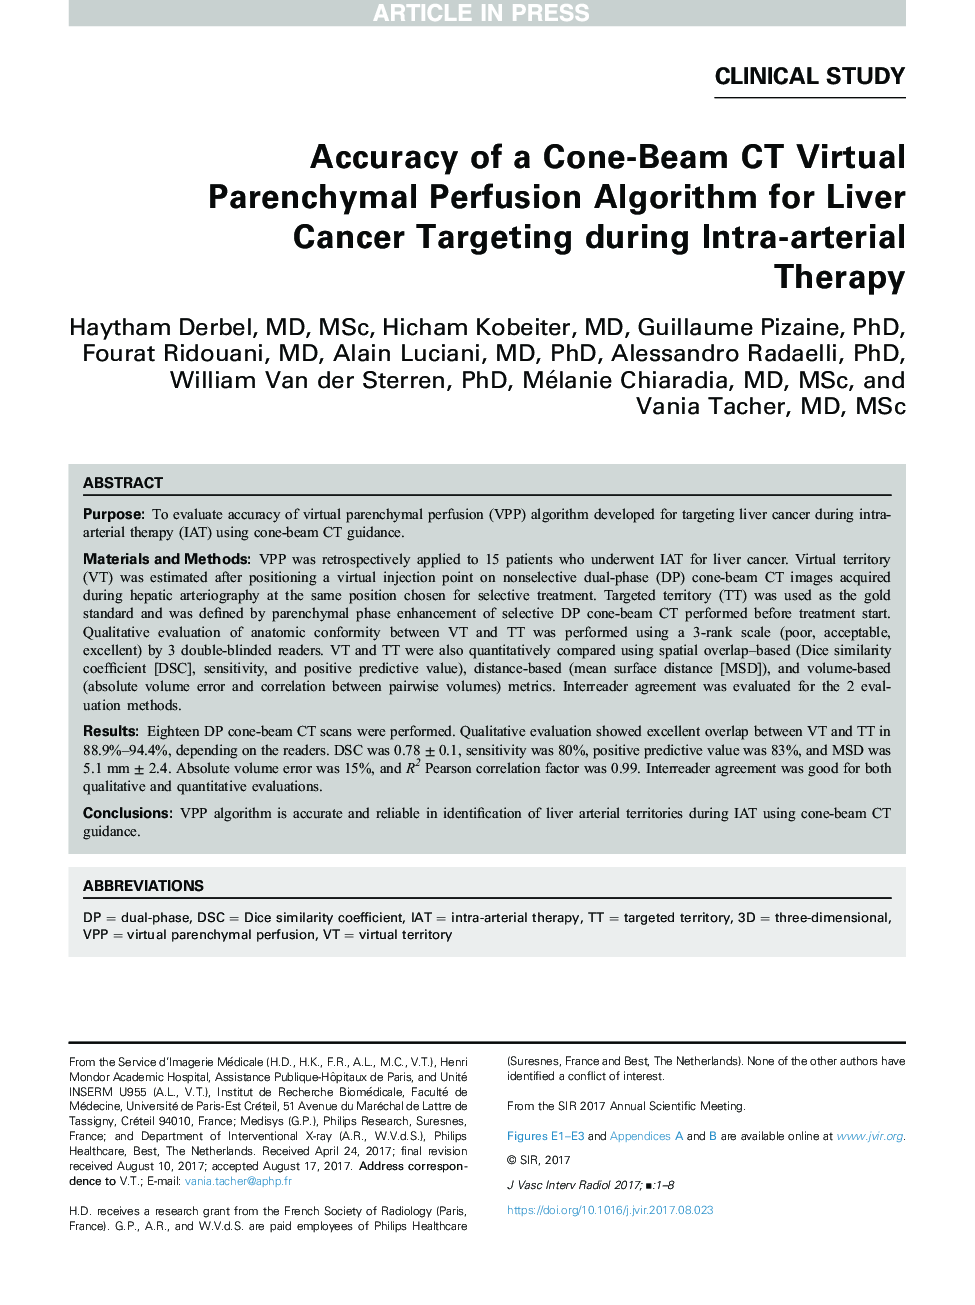 Accuracy of a Cone-Beam CT Virtual Parenchymal Perfusion Algorithm for Liver Cancer Targeting during Intra-arterial Therapy